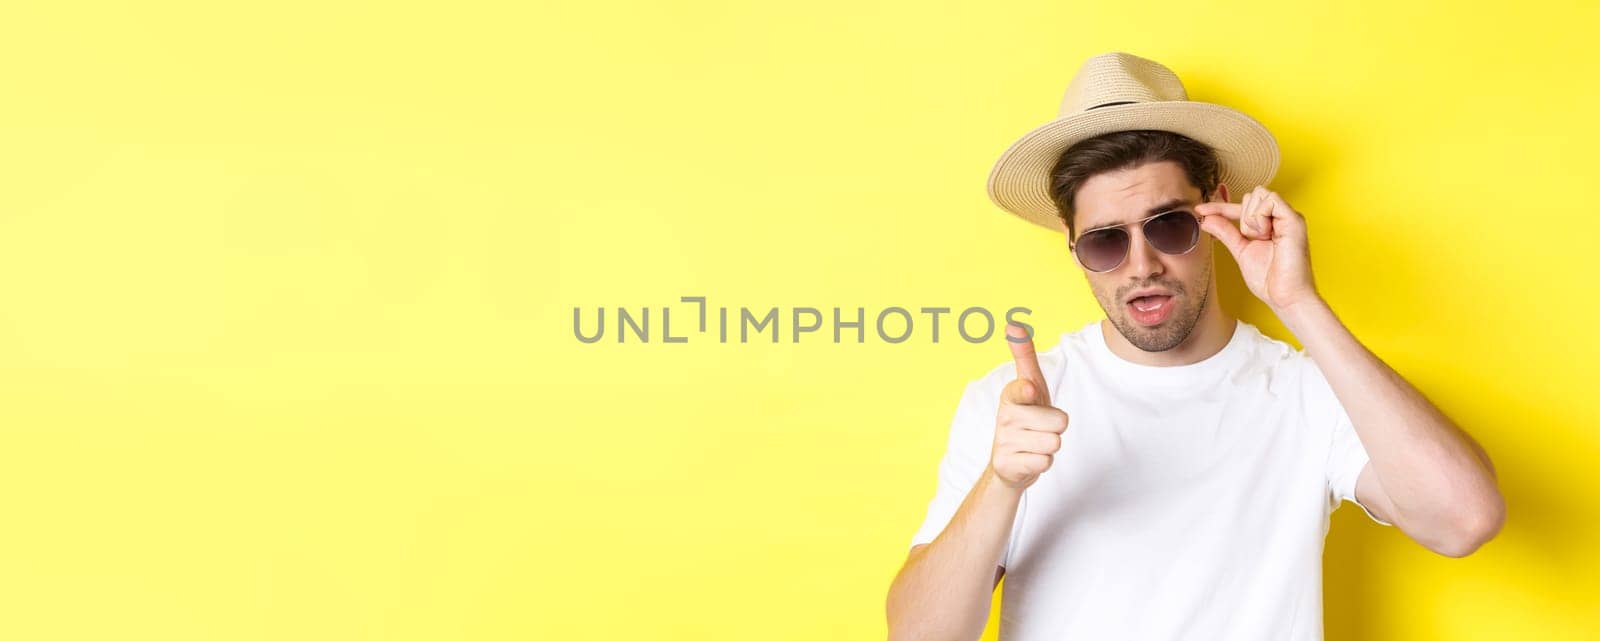 Concept of tourism and vacation. Cool and sassy man flirting with you, wearing sunglasses and pointing finger at camera, standing over yellow background.